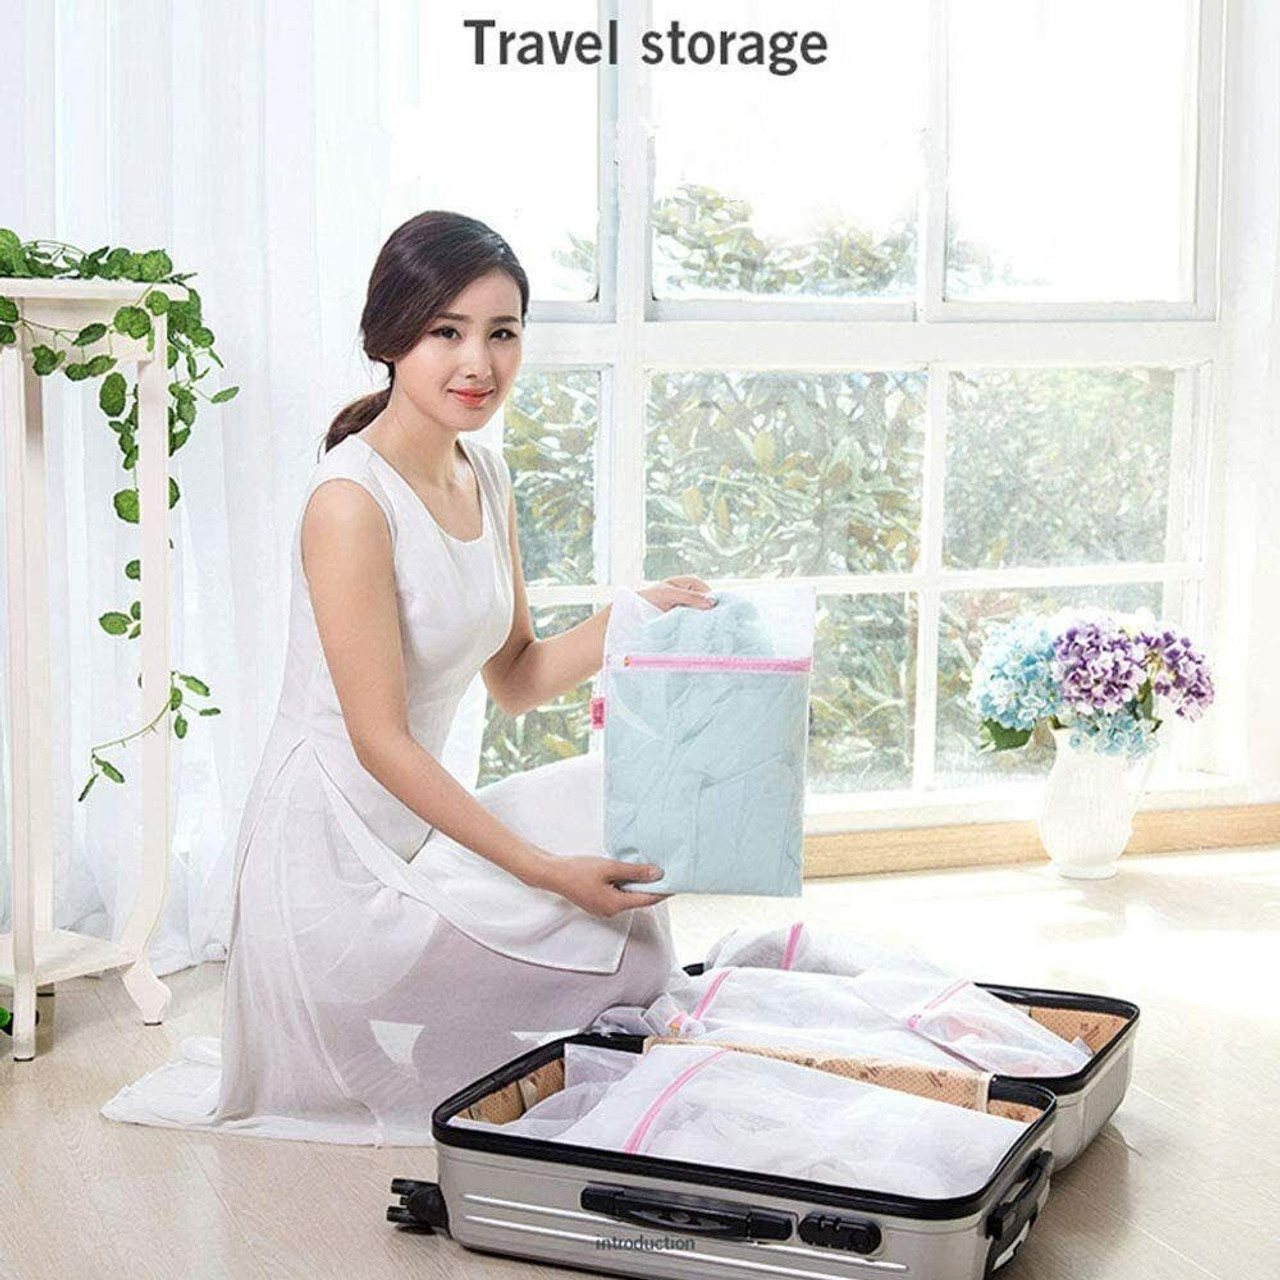 Storage Bags Washing Hine Net Bag Laundry Household Wash Bags Foldable  Zippered Mesh Lingerie Bra Sock Underwear Clothes Protection Dr Dhbcv From  0,69 €